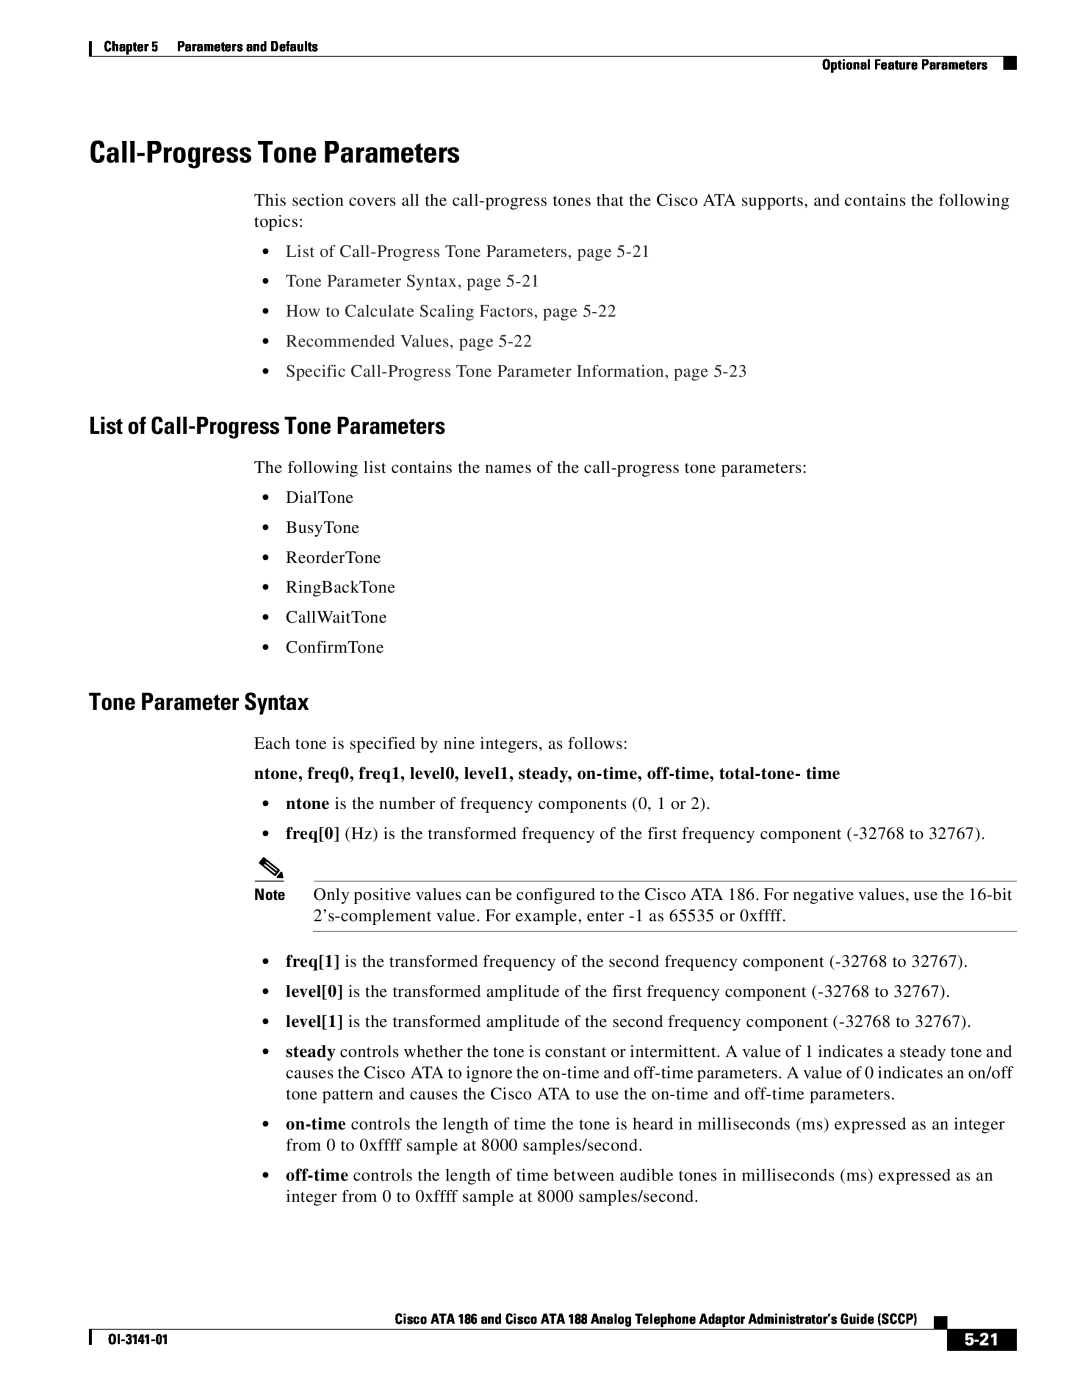 Cisco Systems ATA 188 List of Call-Progress Tone Parameters, Tone Parameter Syntax, Recommended Values, page, 5-21 